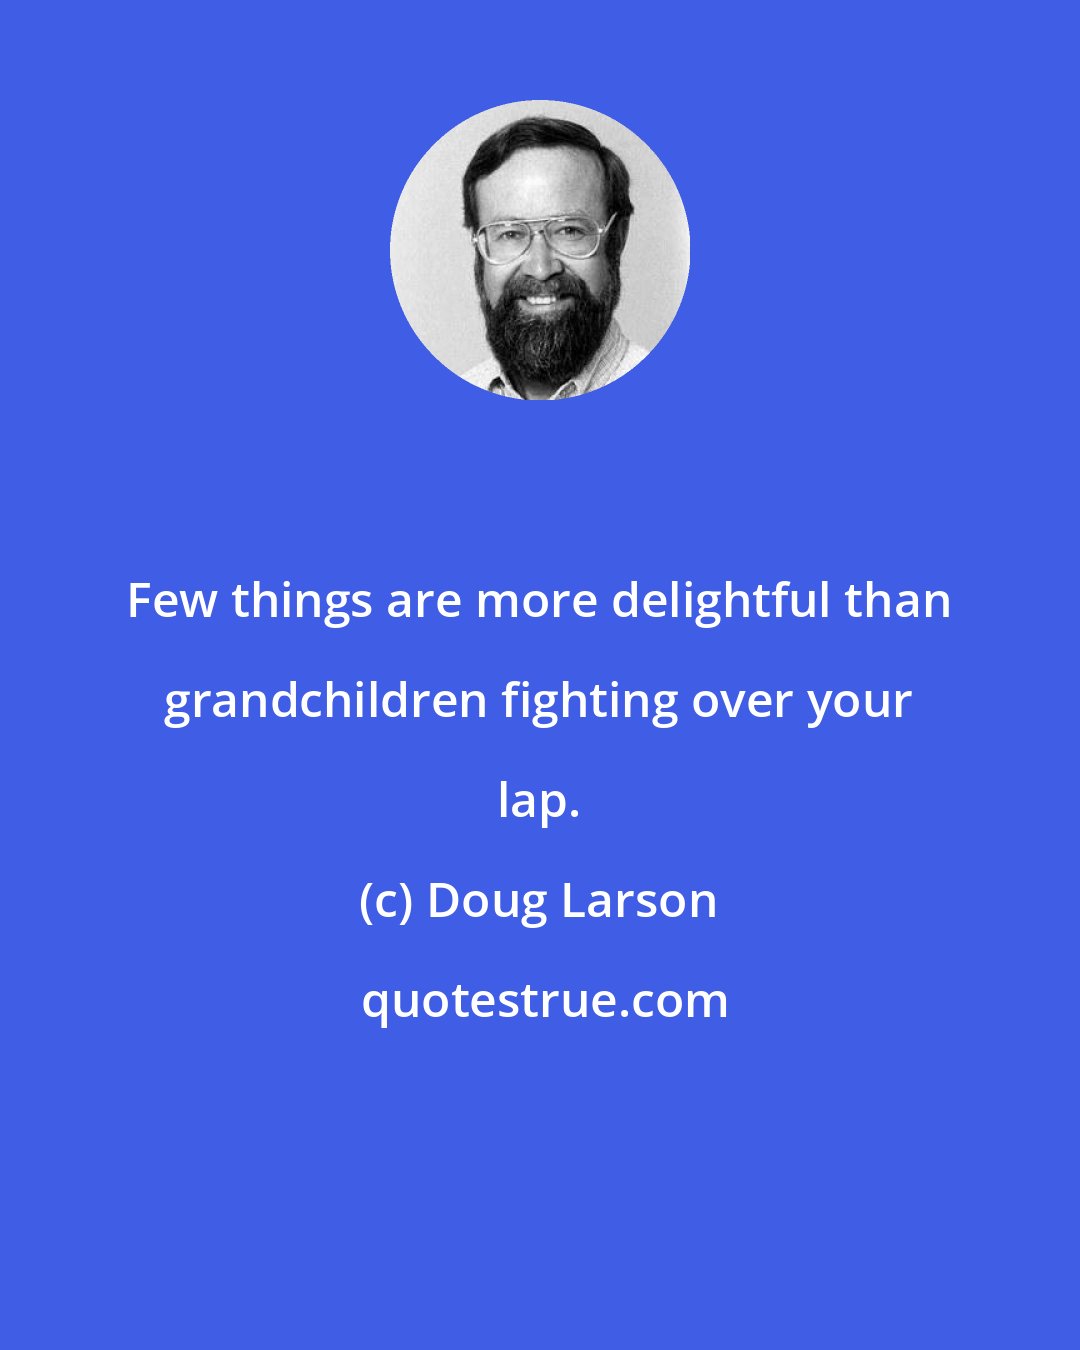 Doug Larson: Few things are more delightful than grandchildren fighting over your lap.